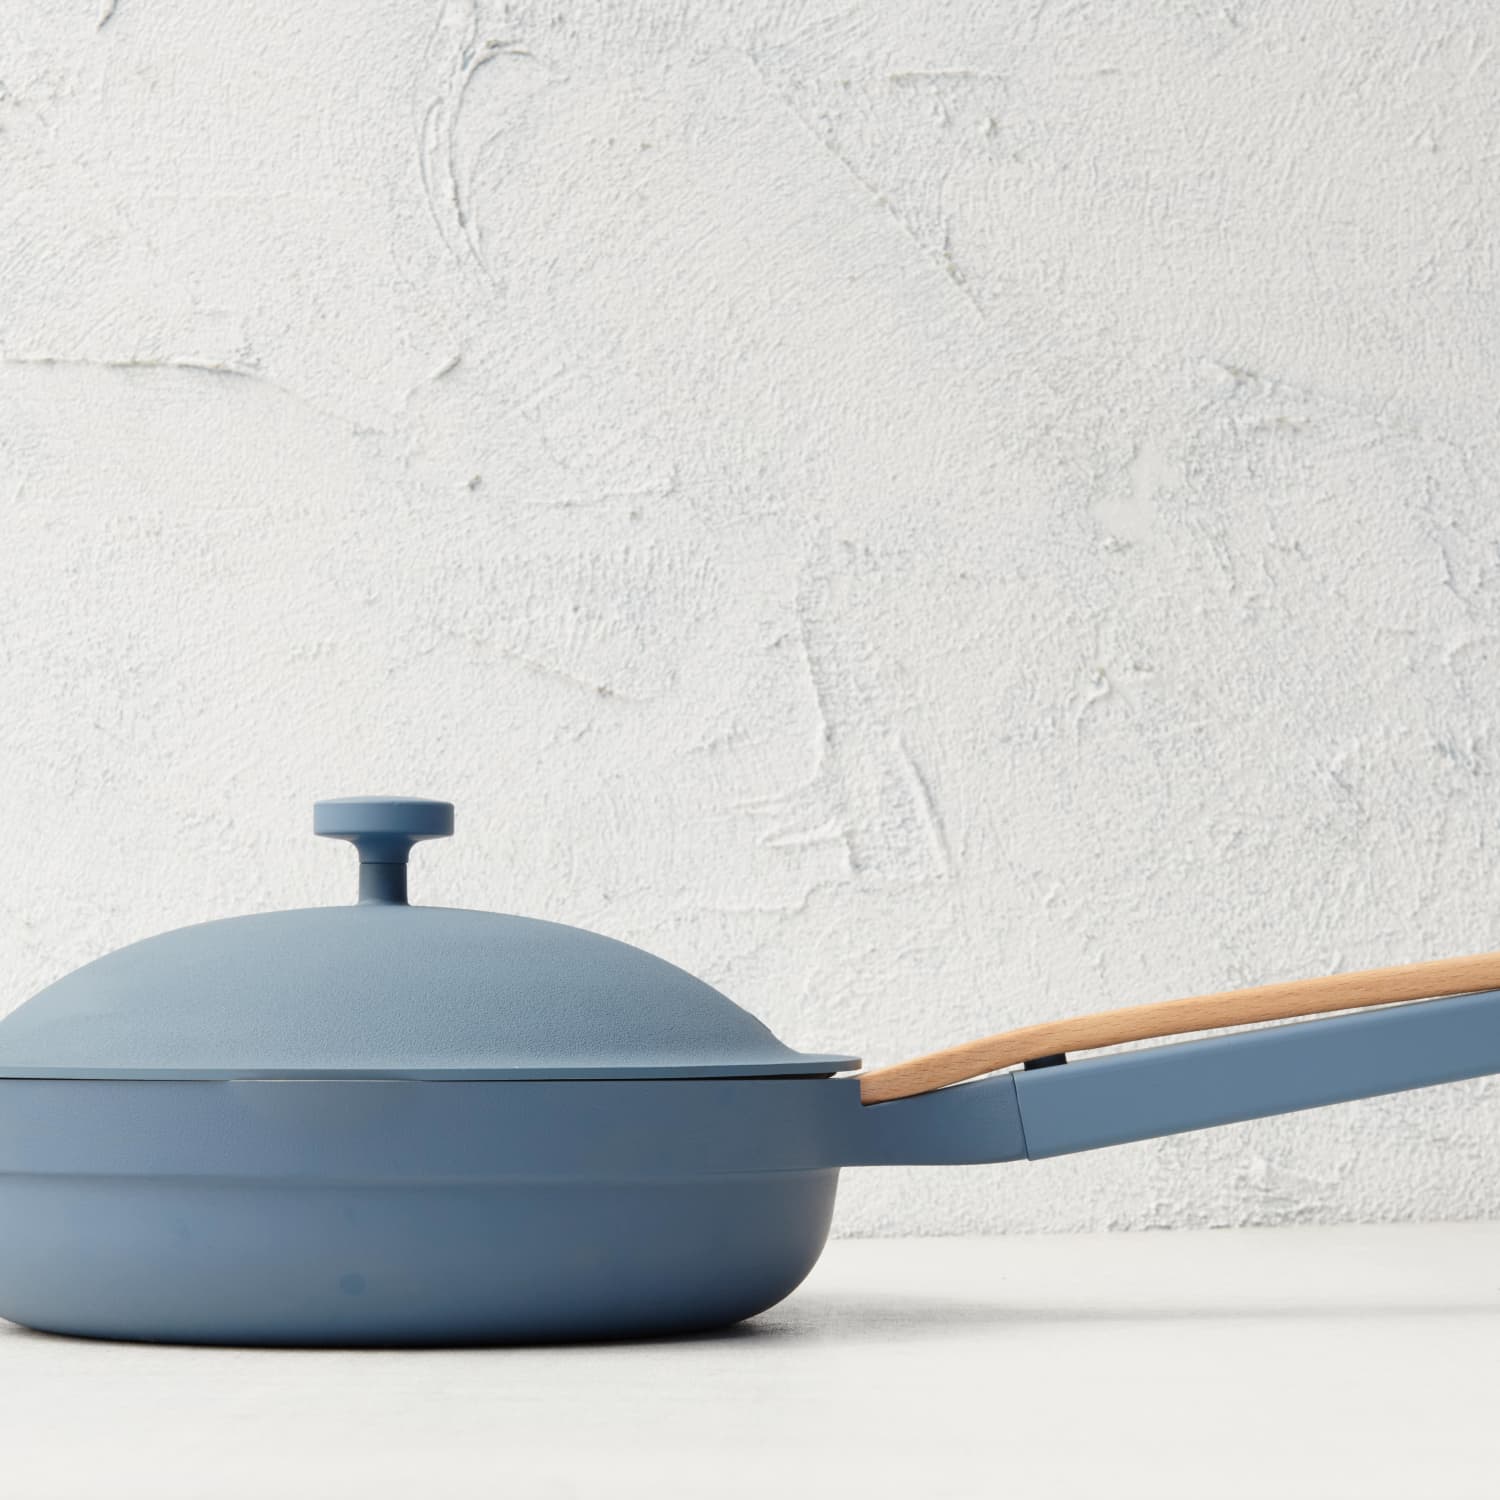 Our Place Always Pan Launches Blue Salt Colored Cookware: October 2020